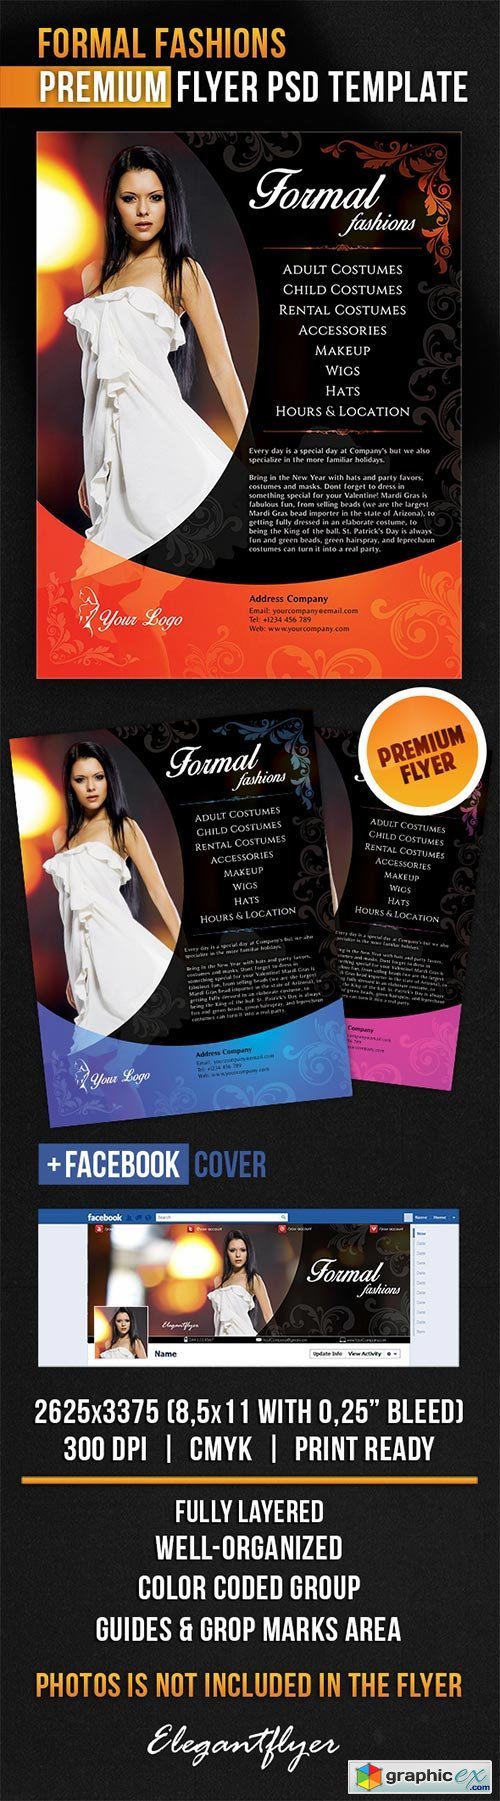 Formal Fashions Flyer PSD Template + Facebook Cover